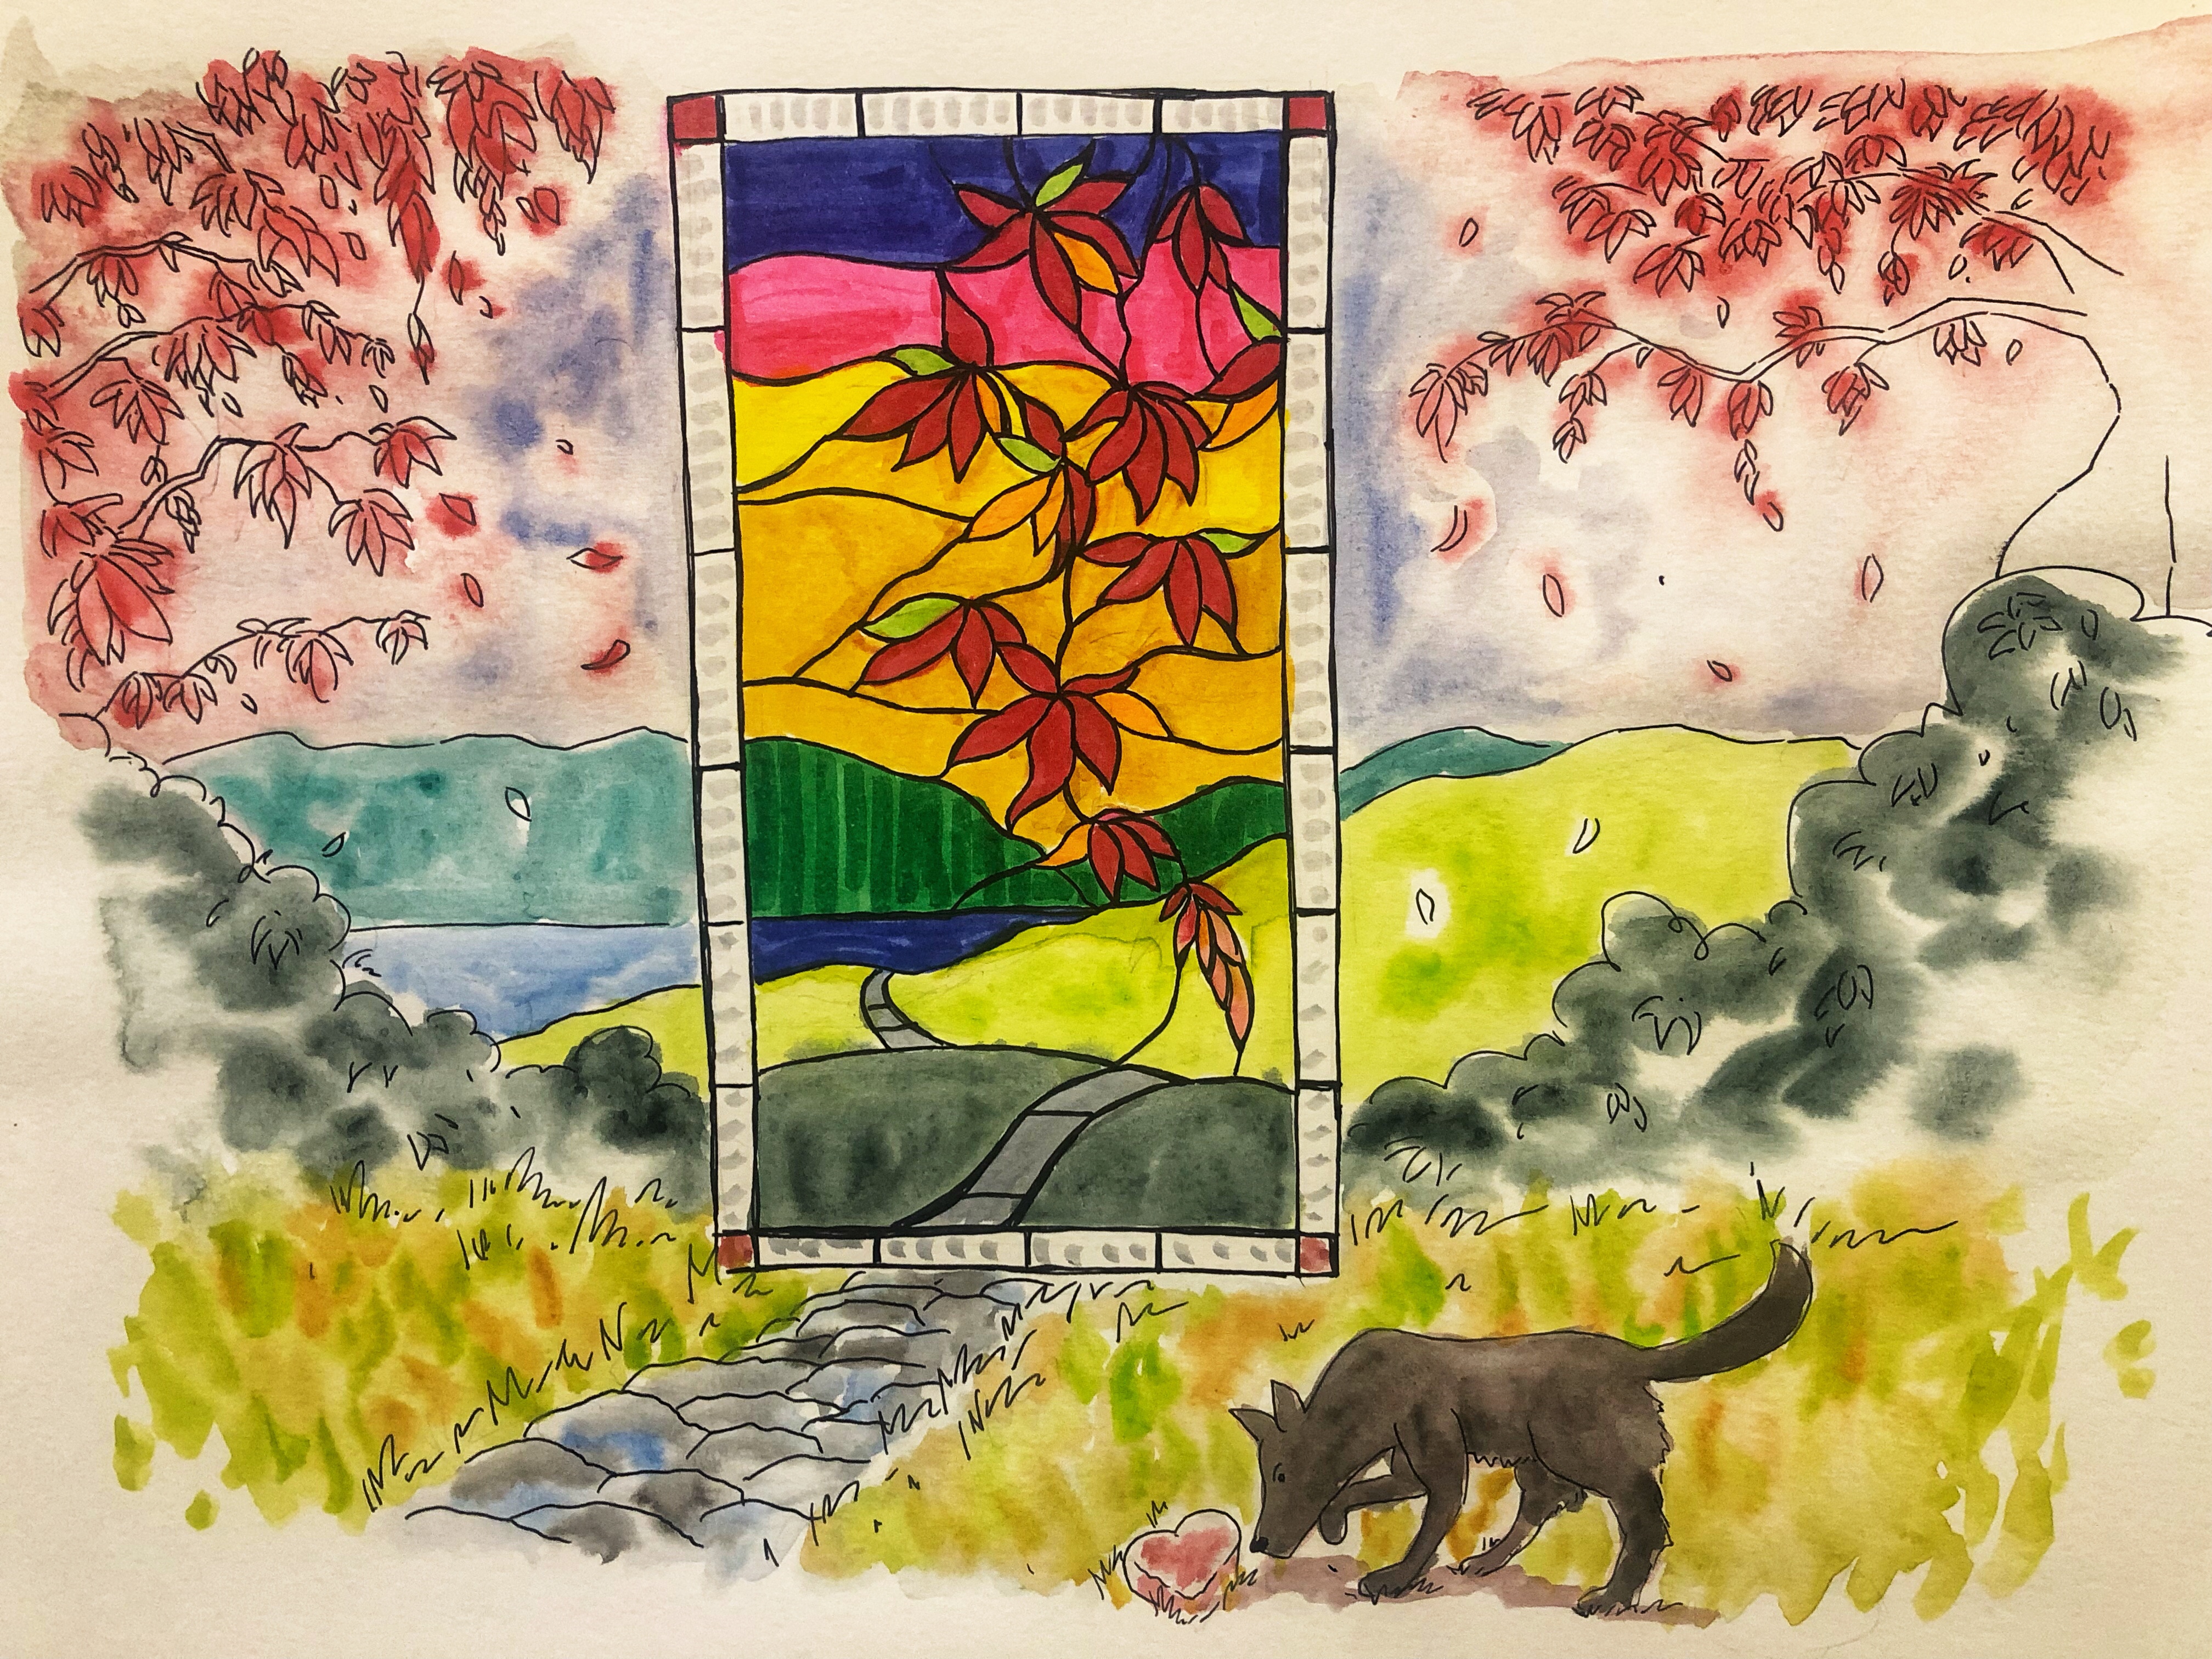 Illustration of a stained glass window blending into nature.